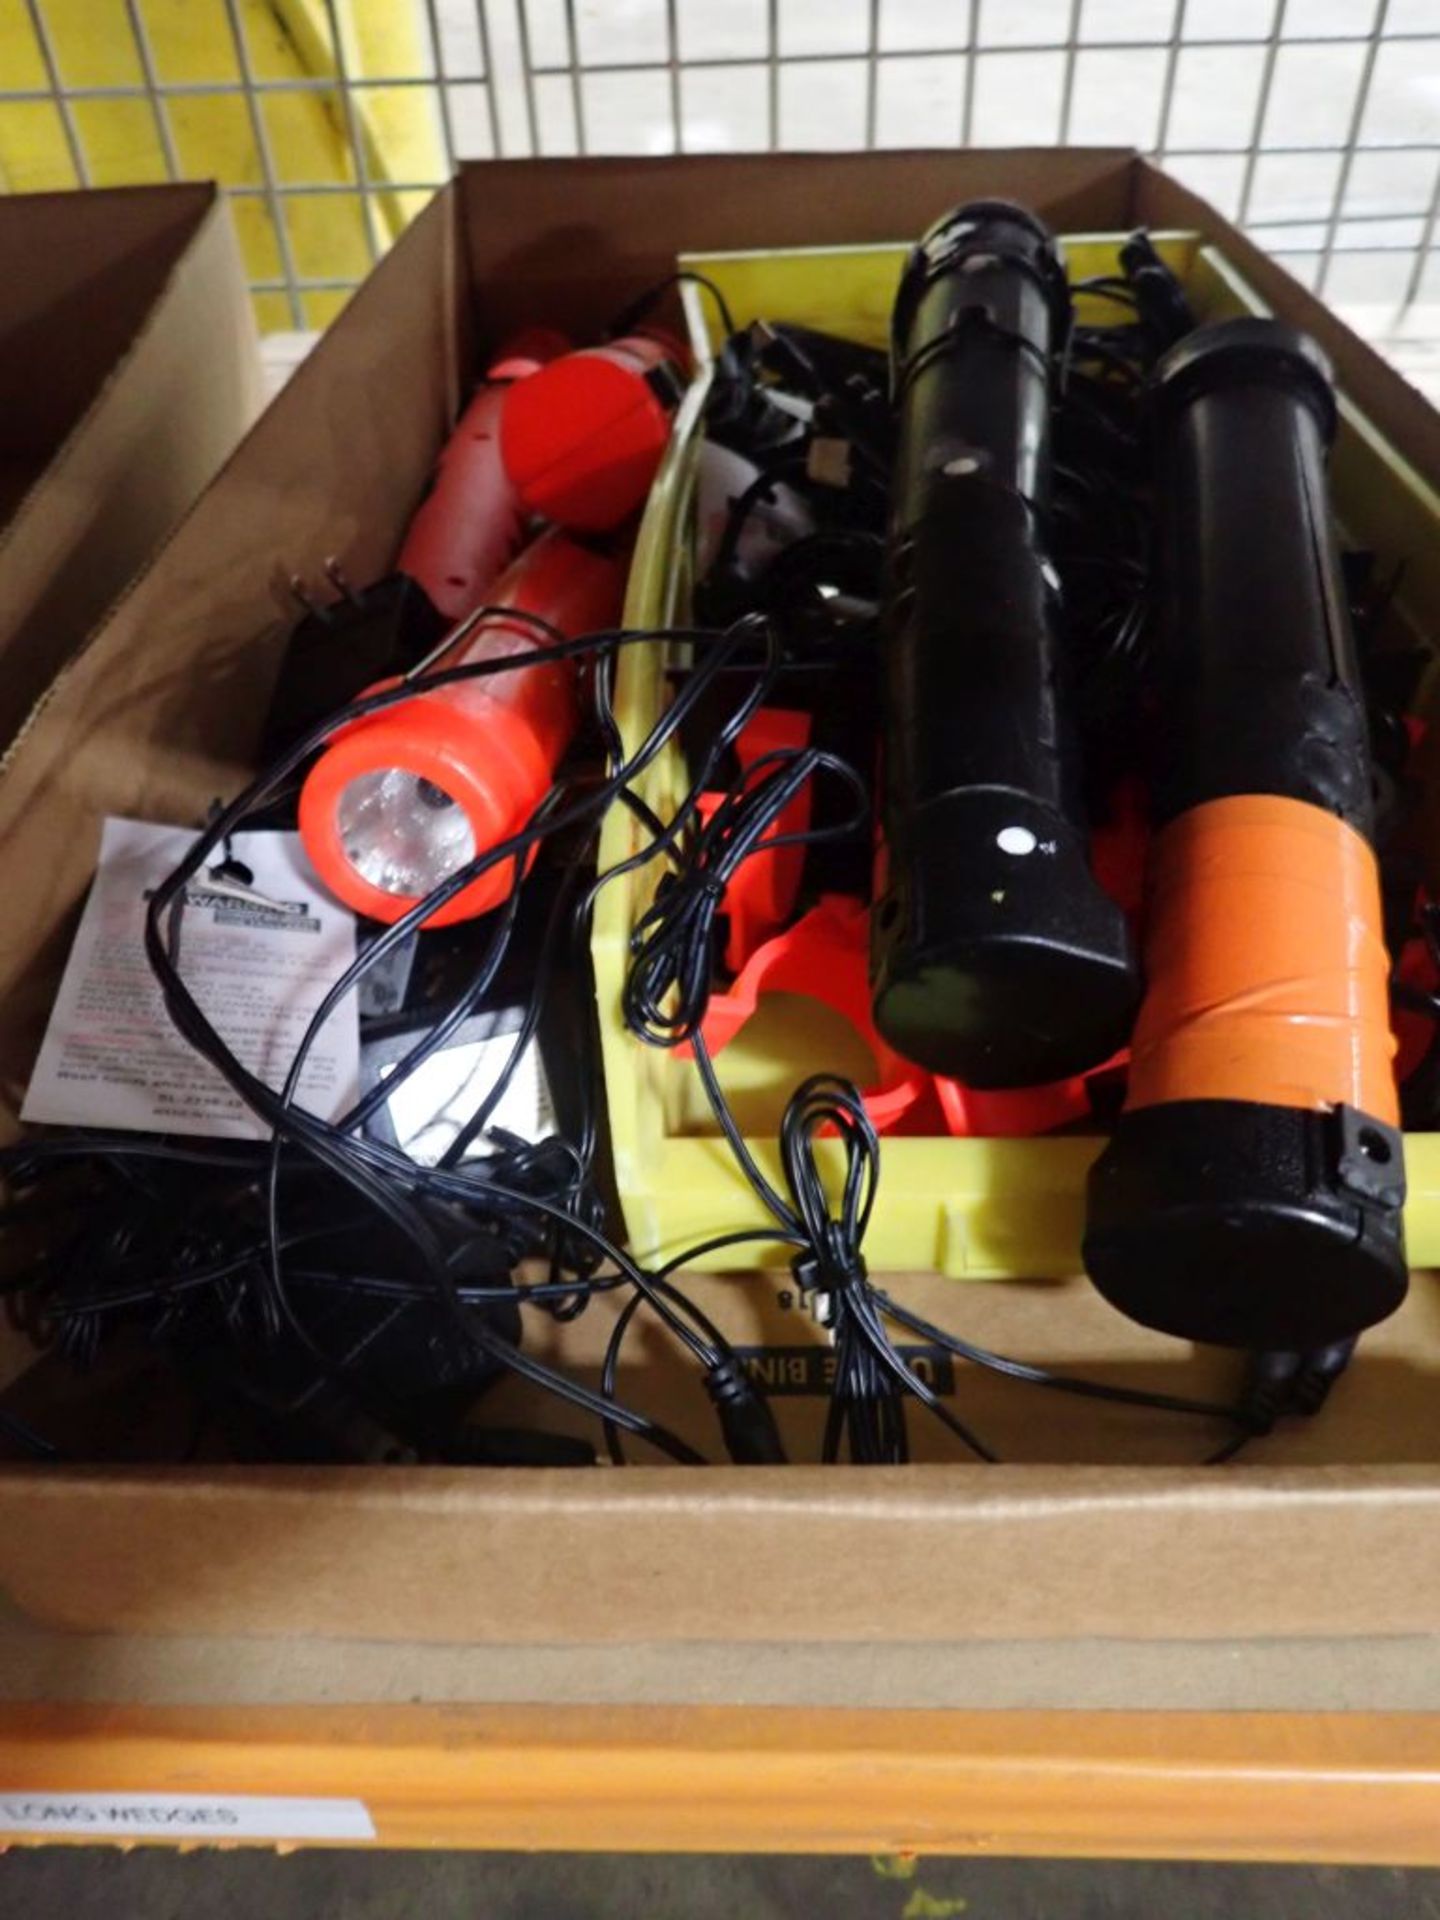 Lot of Assorted Tools | Tag: 241628 | Limited Forklift Assistance Available - $10.00 Lot Loading - Image 4 of 4